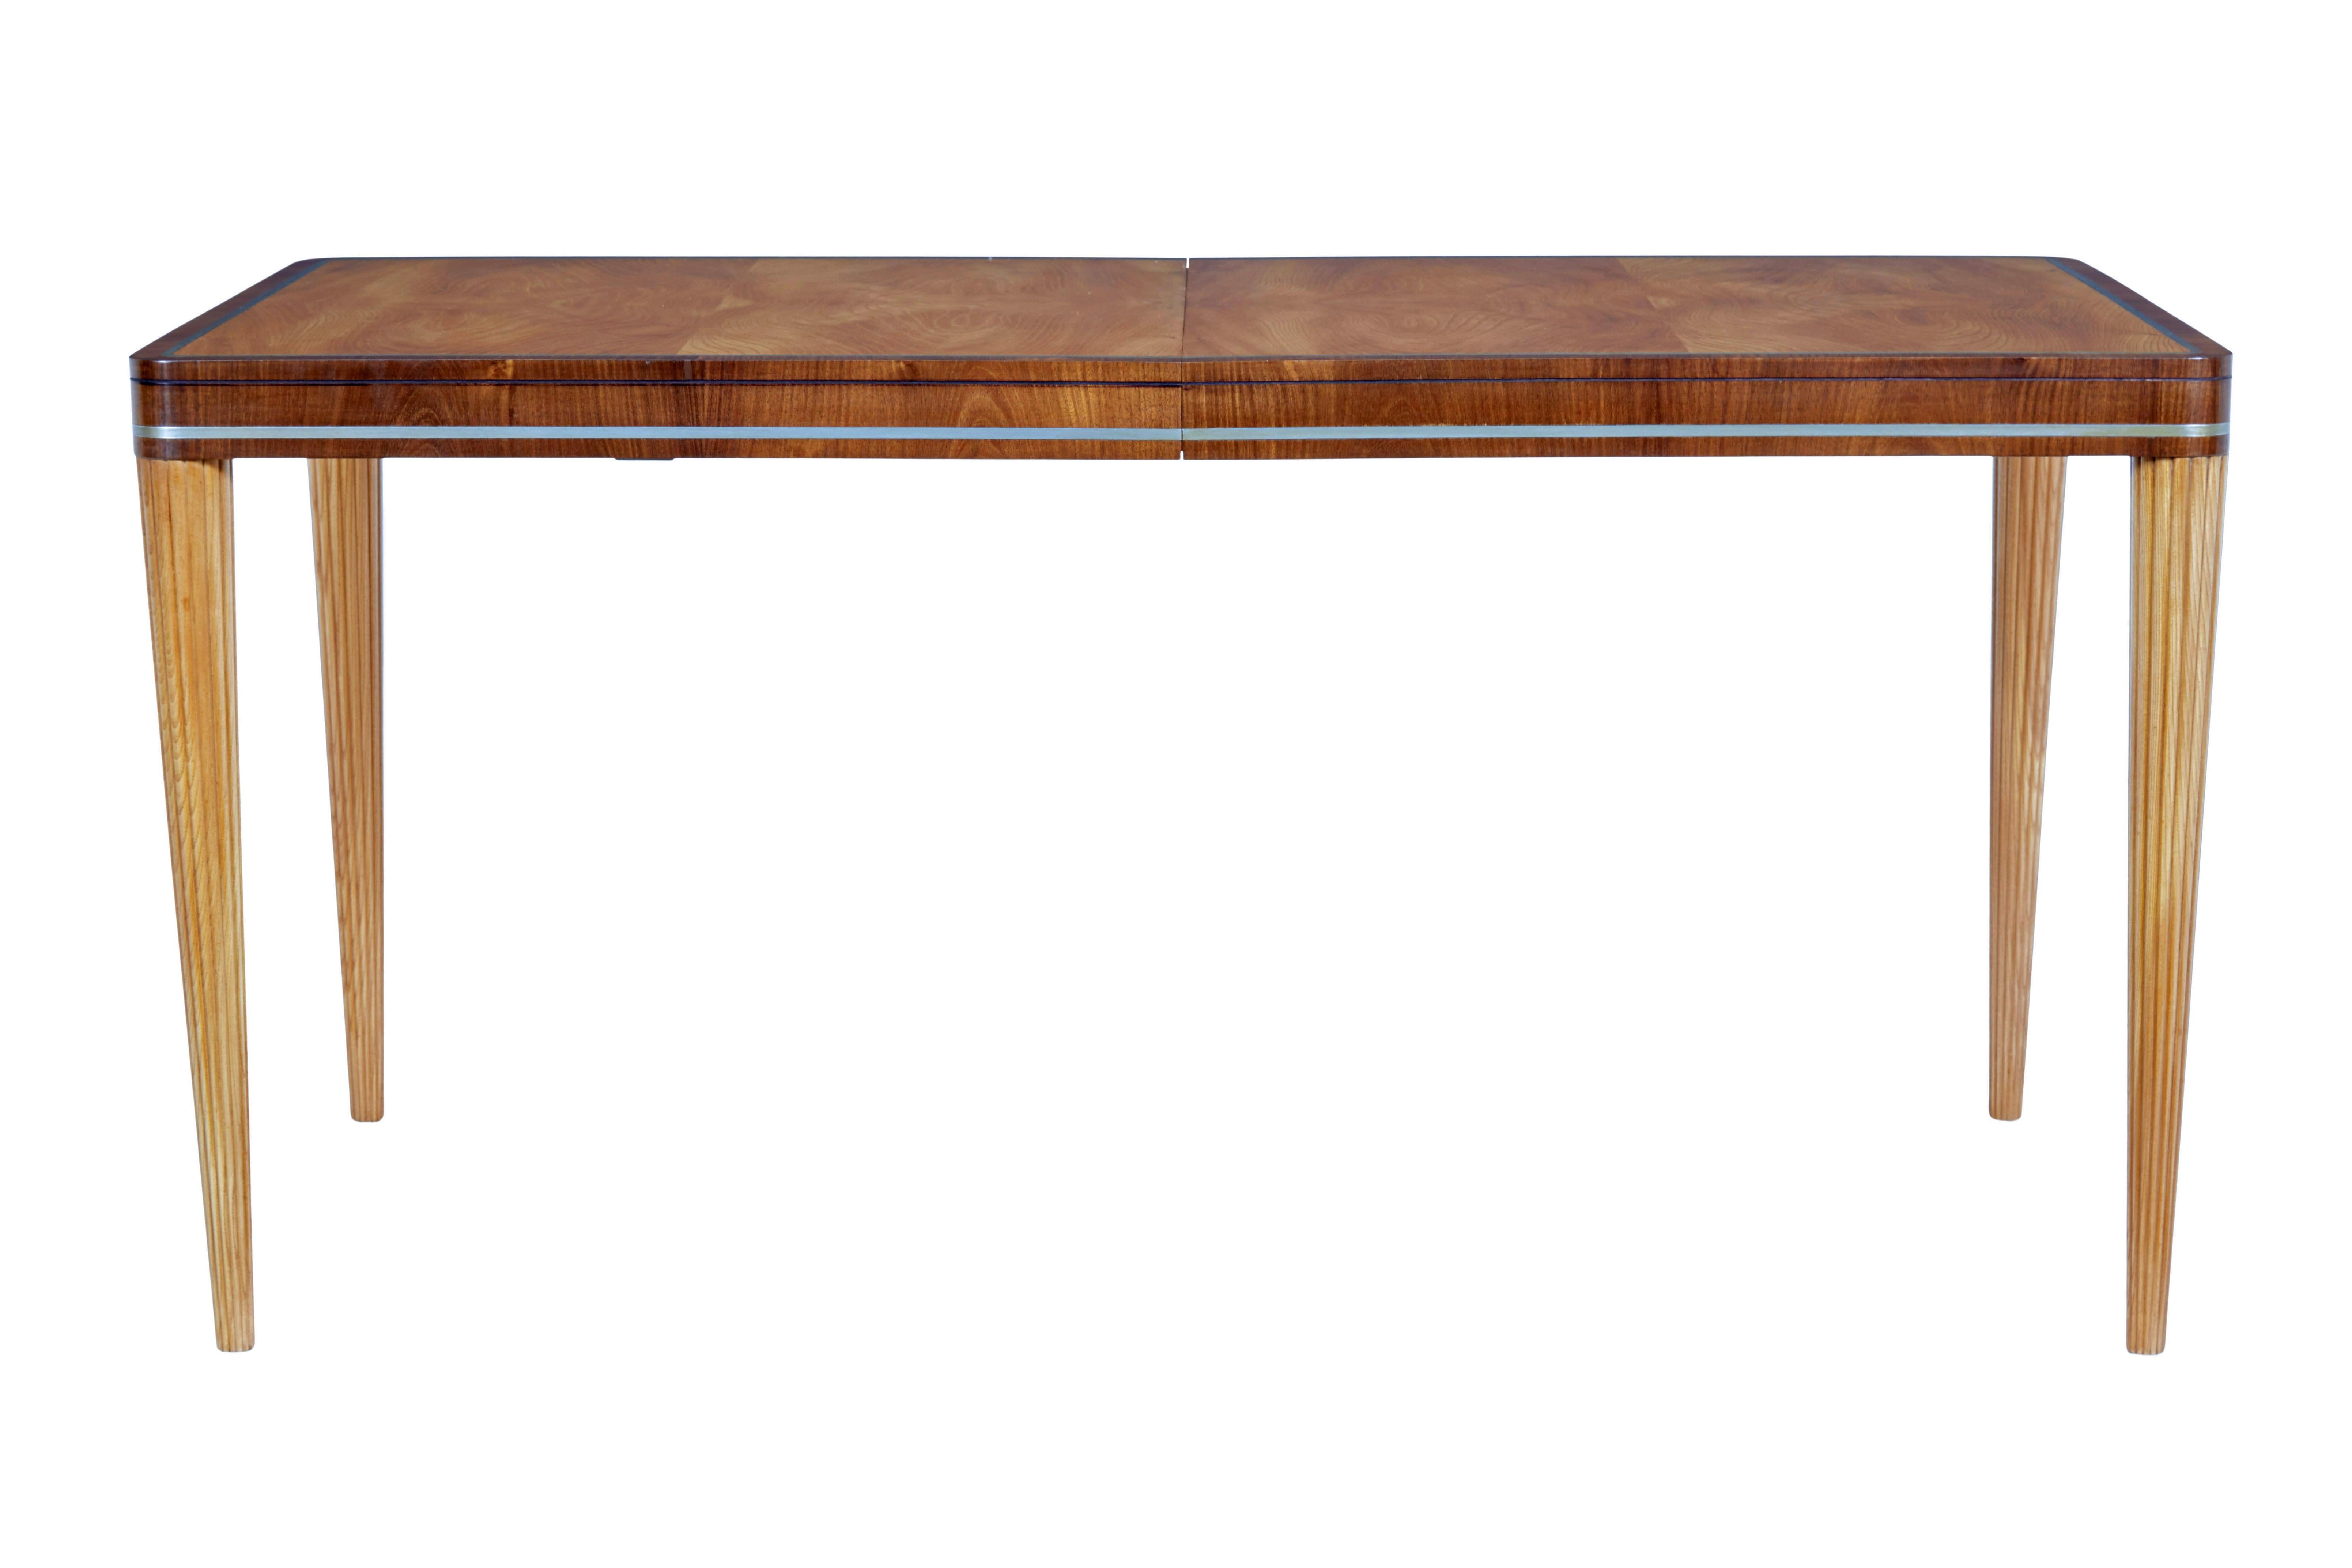 Swedish Mid 20th century elm and mahogany desk by Carl Bergsten For Sale